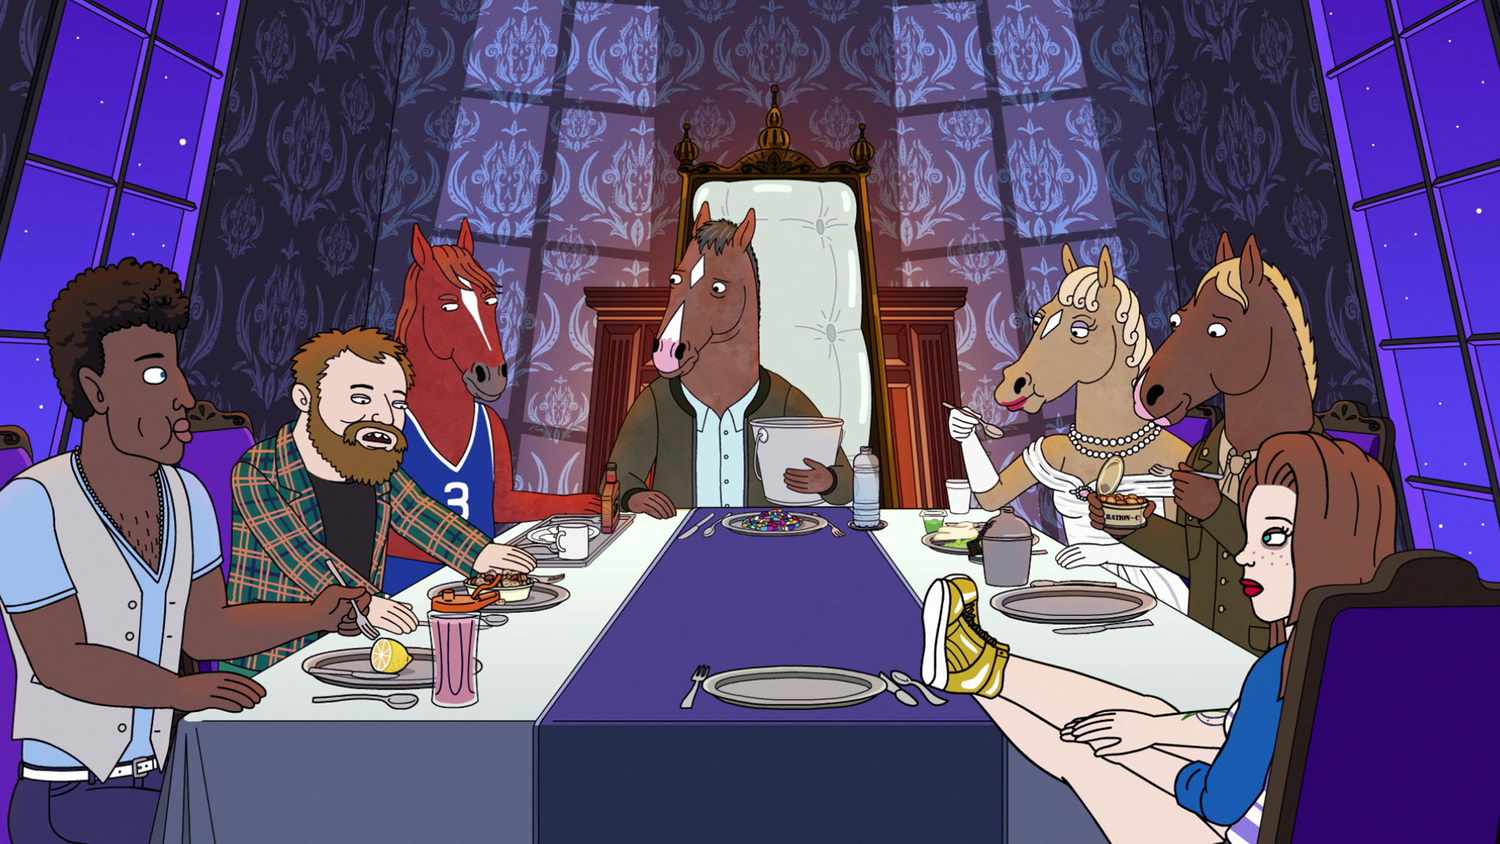 Best of 2020 (Behind the Scenes): How BoJack Horseman showed us 'The View from Halfway Down'